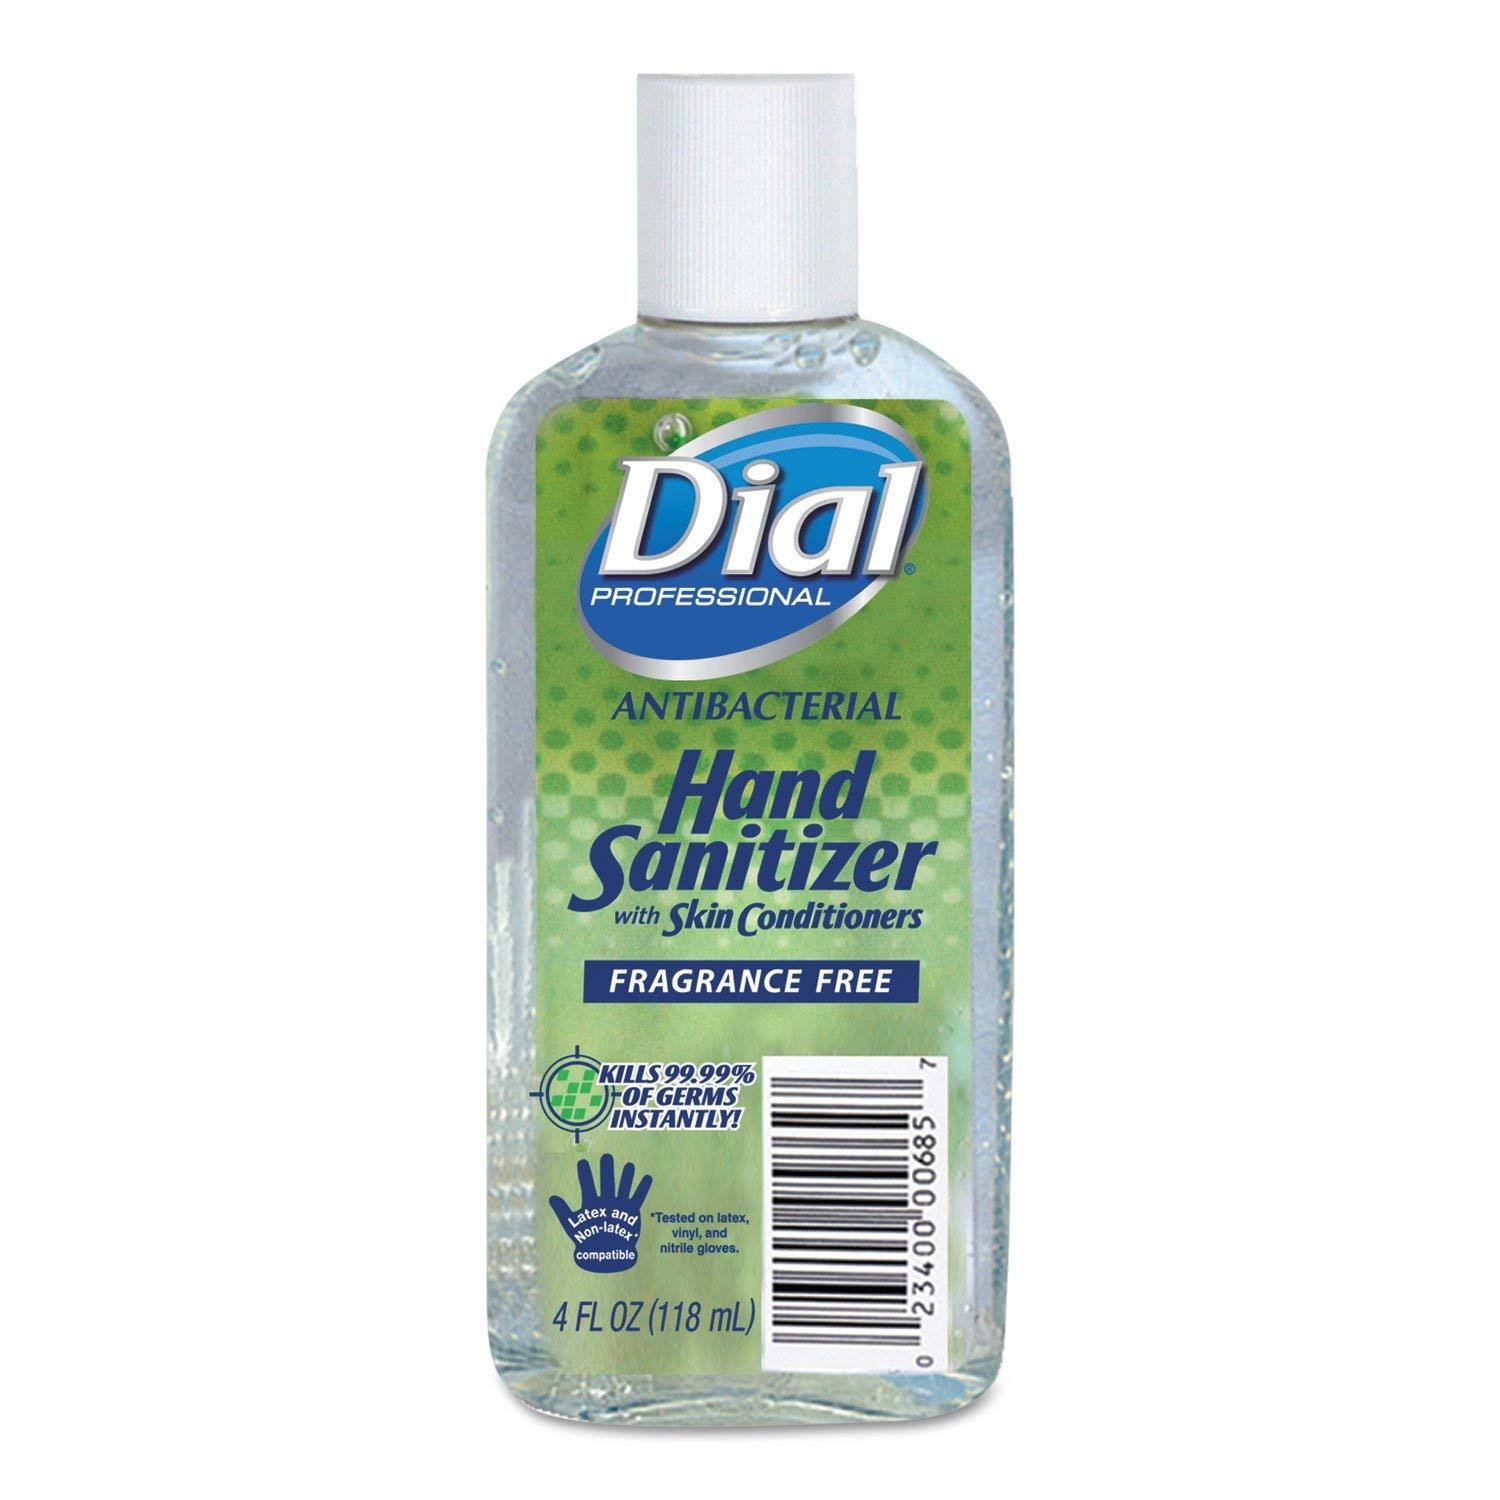 Dial Professional Antibacterial Hand Sanitizer - with Moisturizers, 4oz